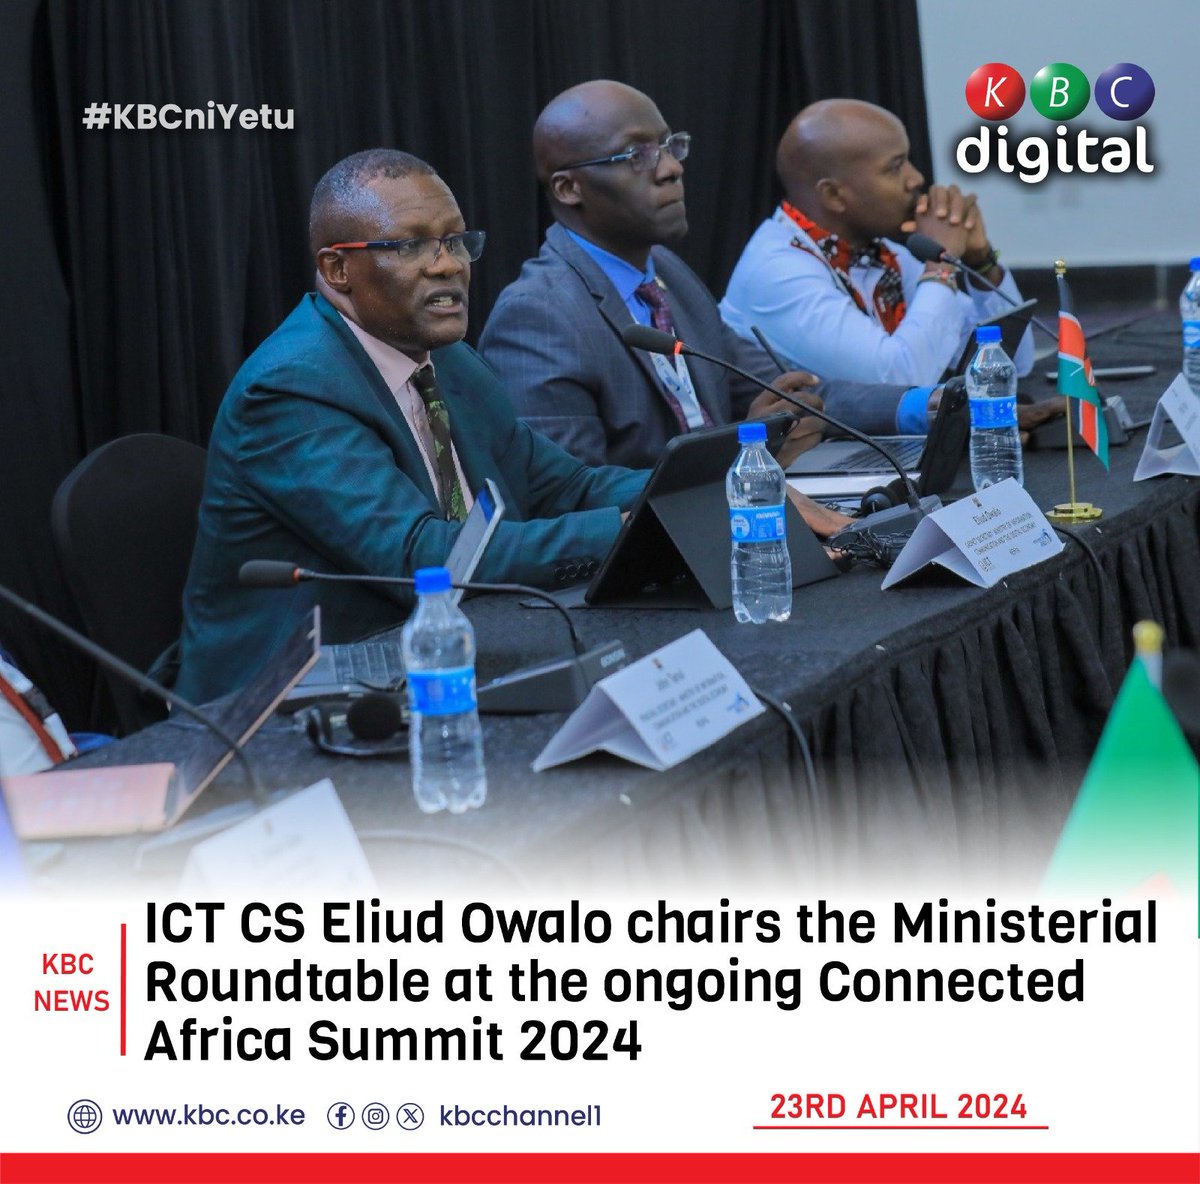 ICT CS Eliud Owalo chairs the Ministerial Roundtable at the ongoing Connected Africa Summit 2024. #KBCniYetu^EM